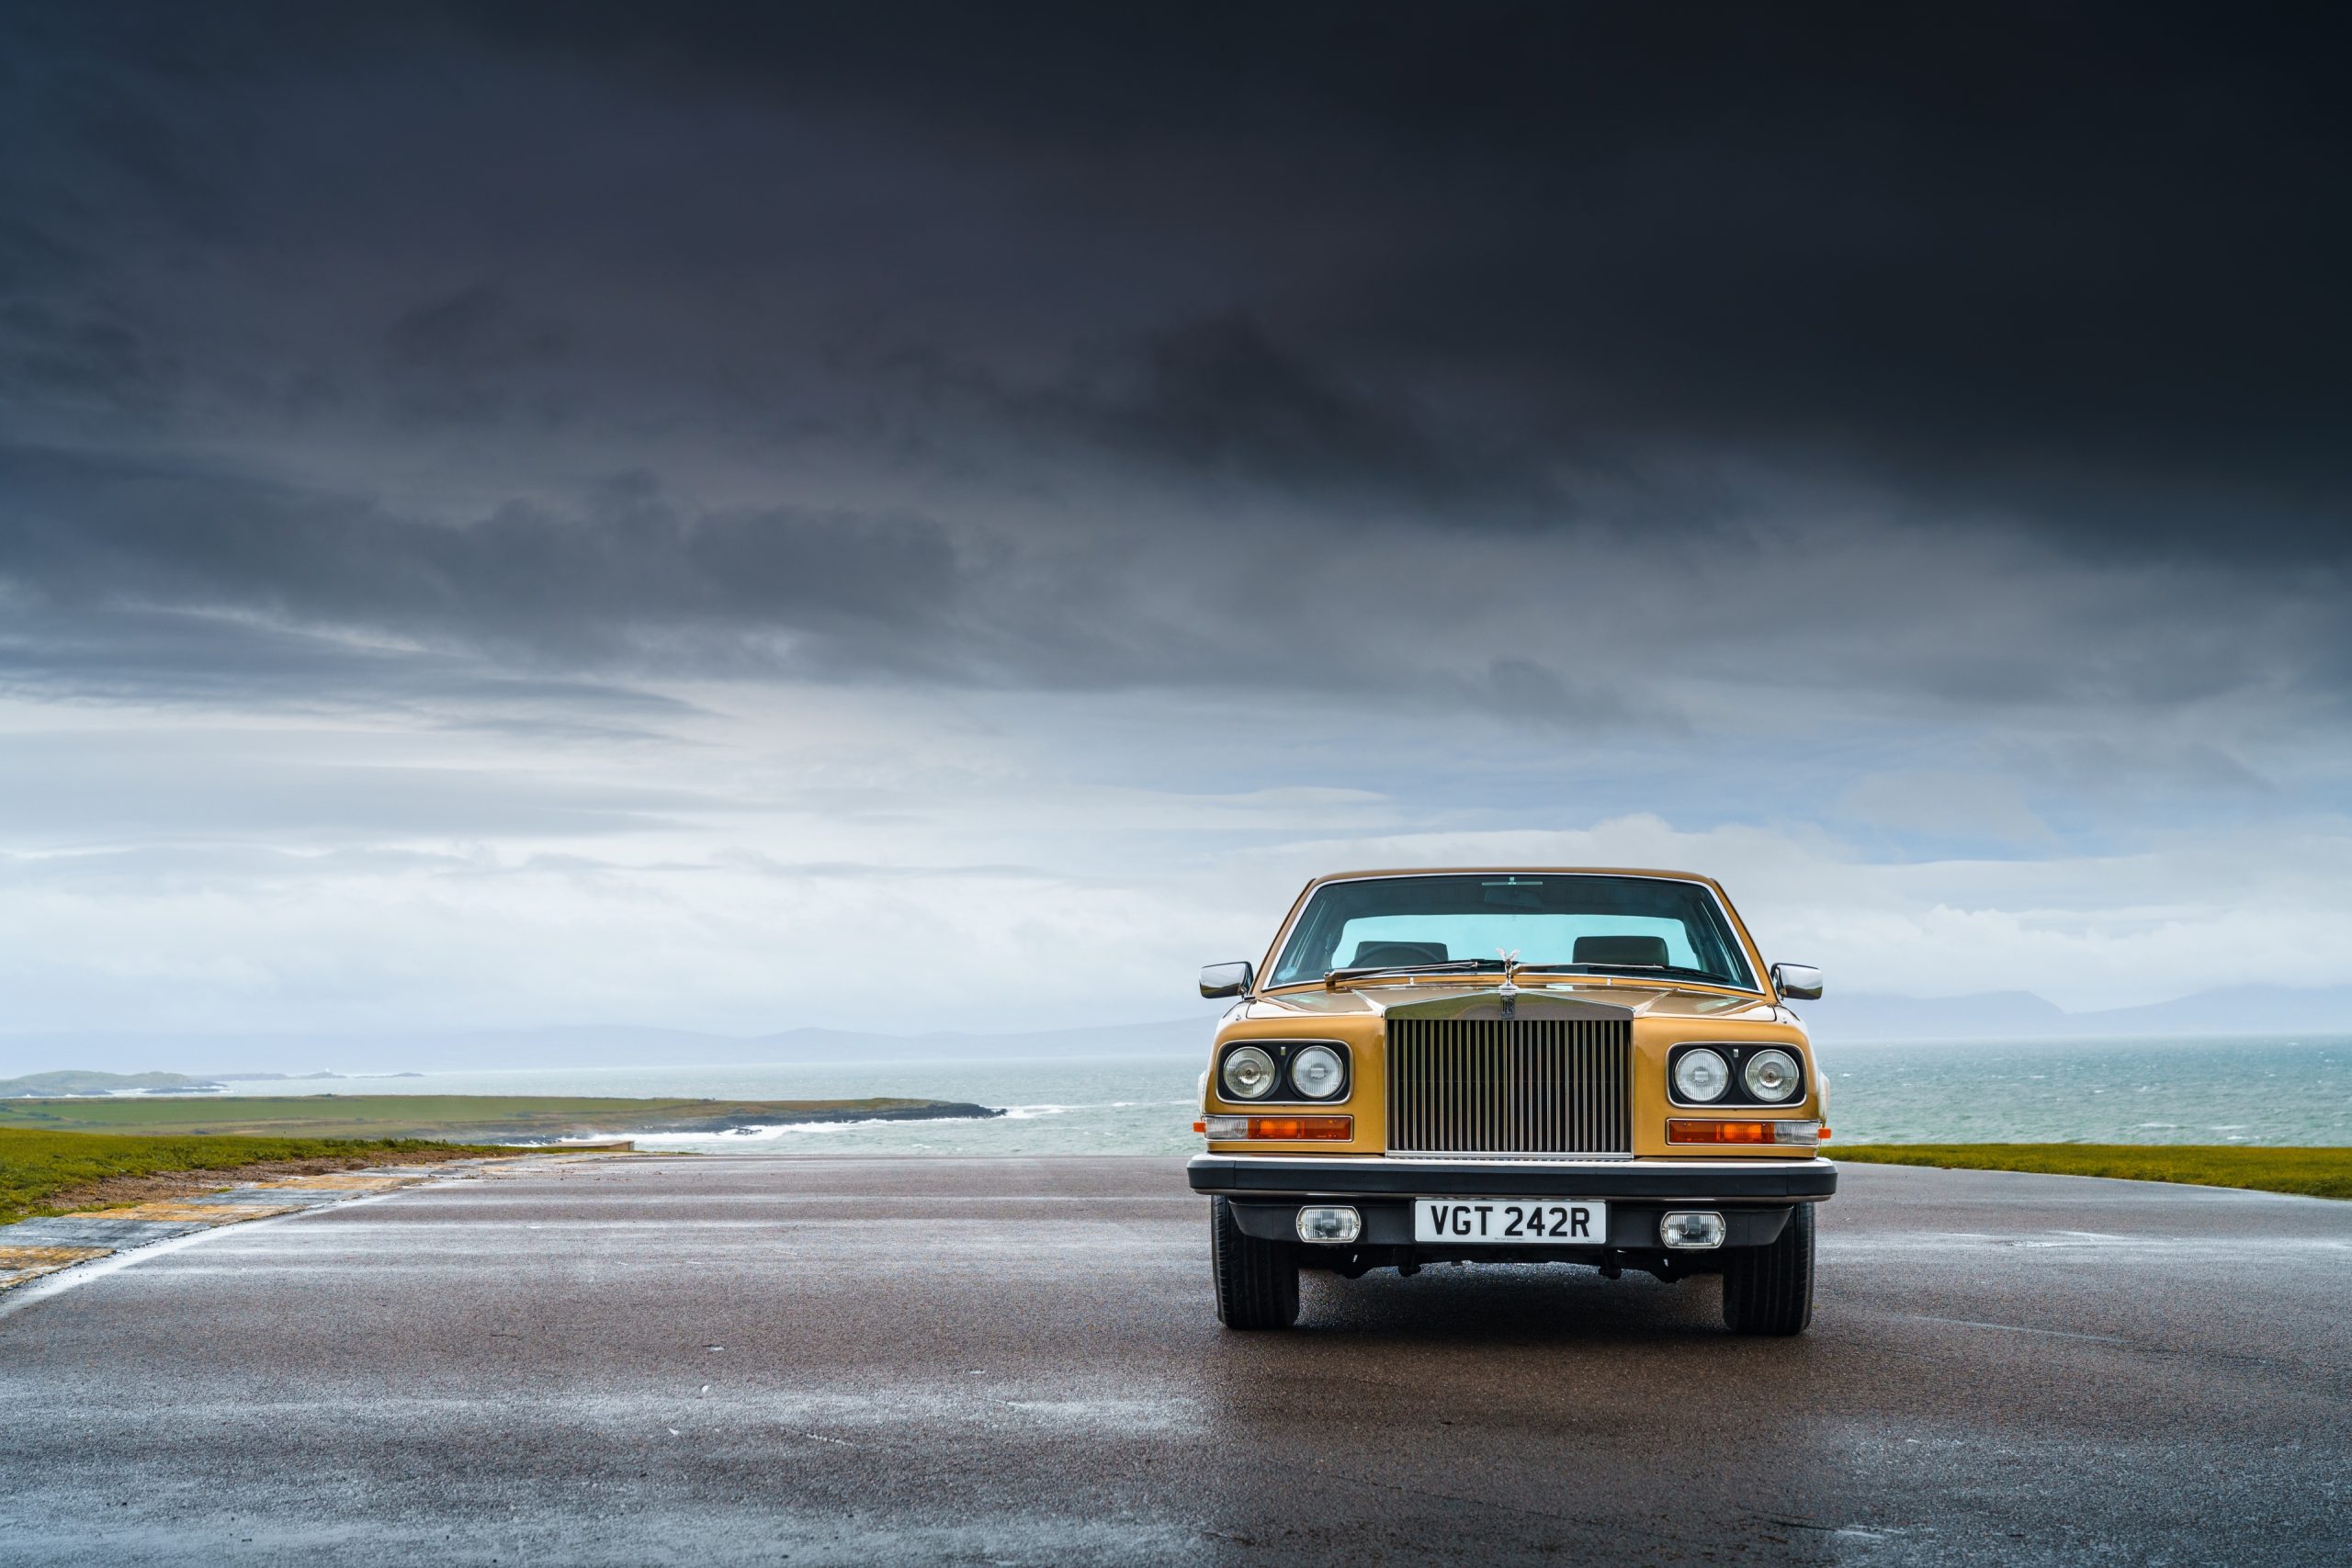 Rolls-Royce Camargue video: “You feel privileged driving it” | Hagerty UK Bull Market List